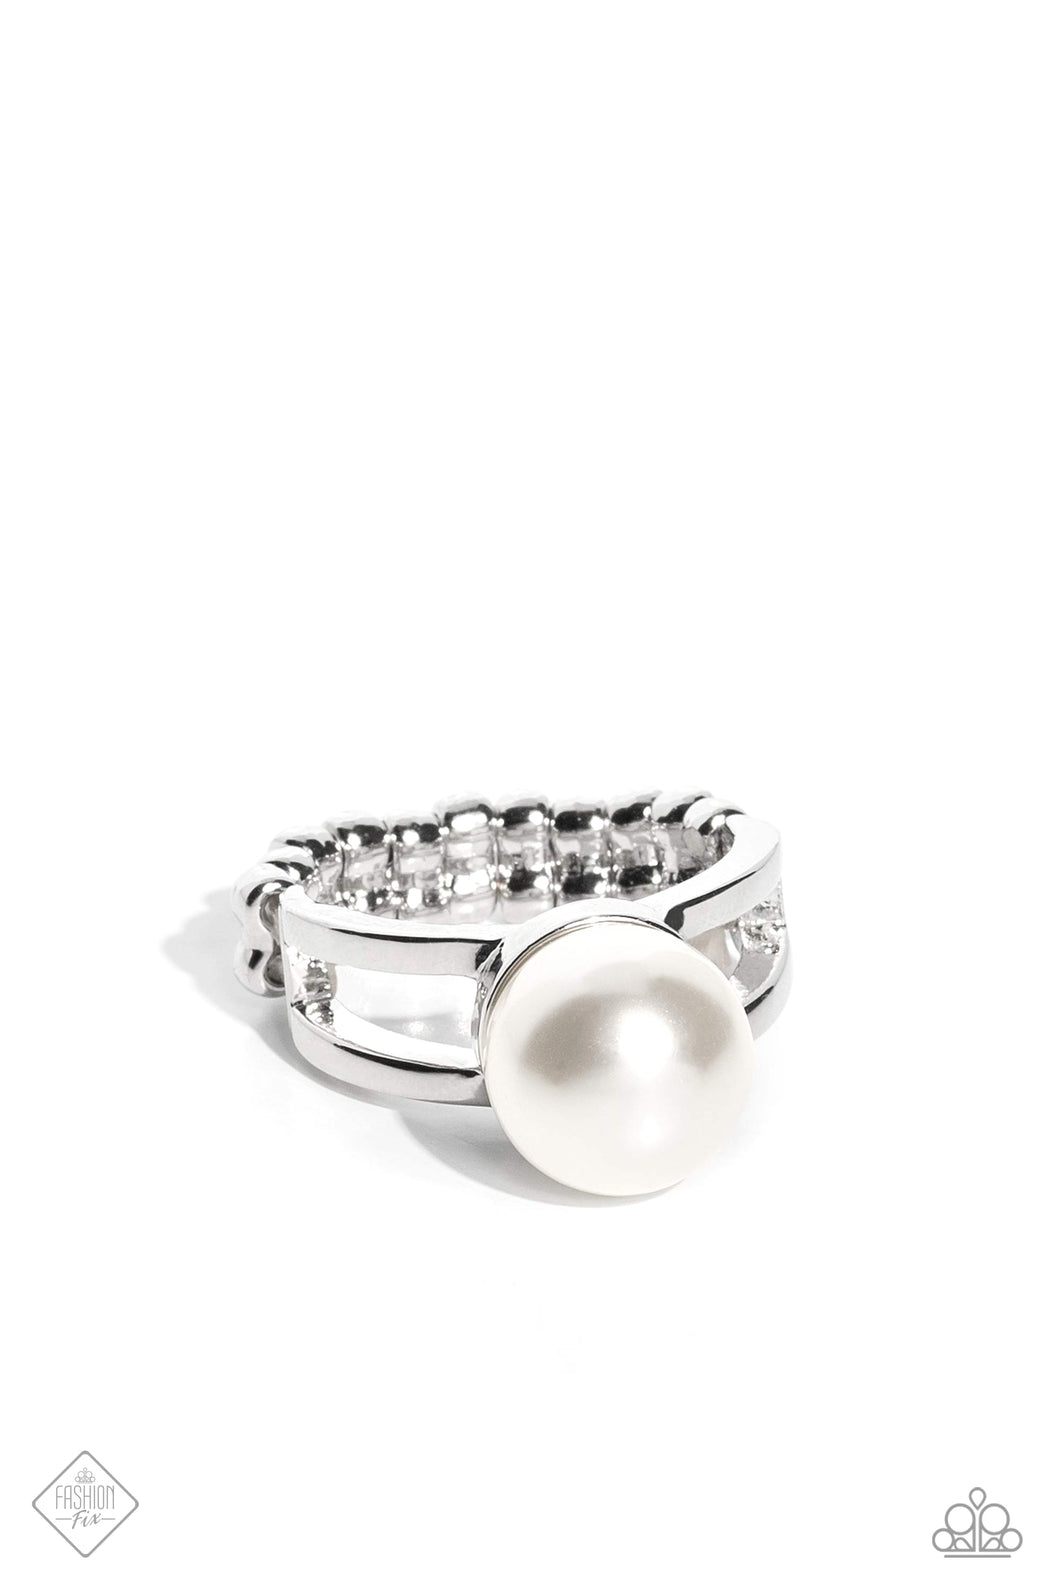 All American PEARL - White (Pearl) Ring